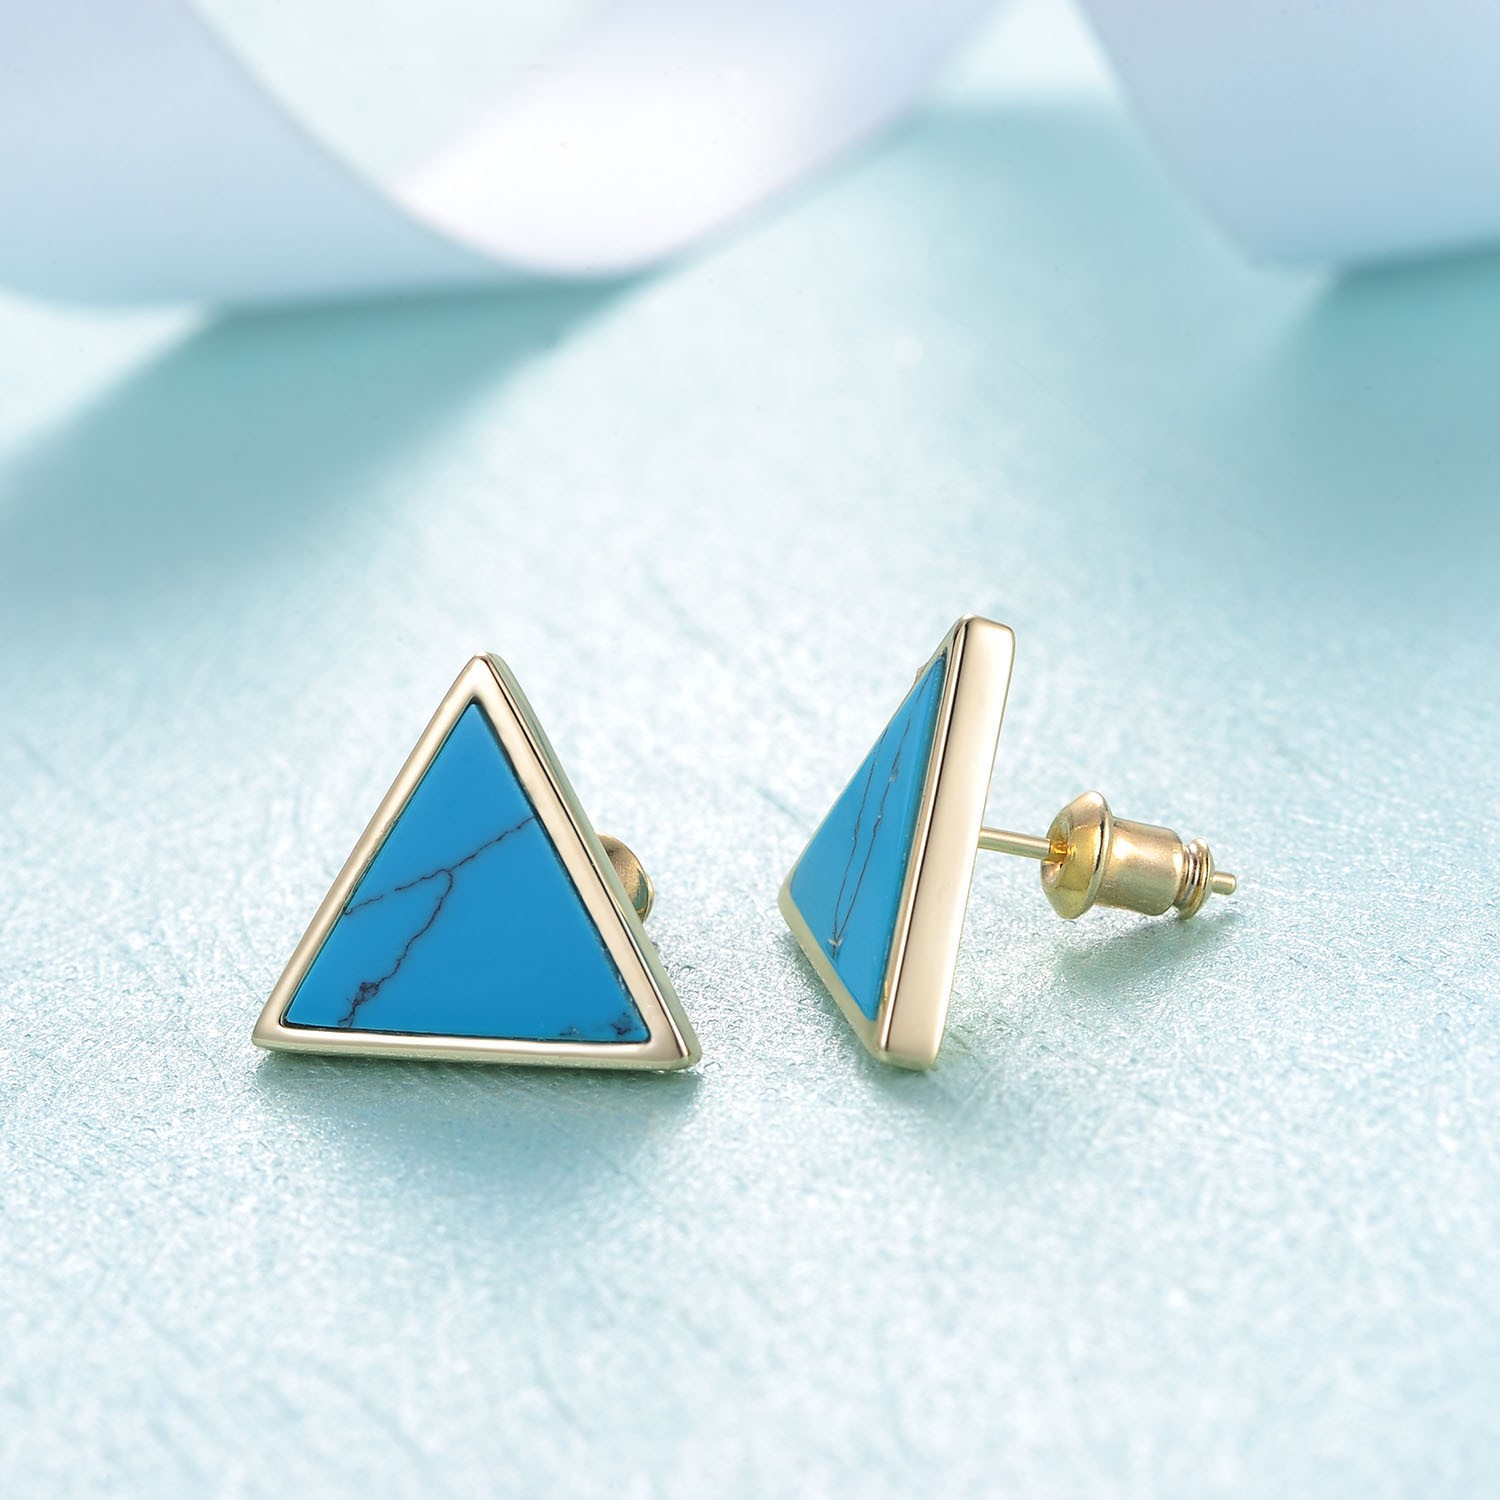 2021 New Style 925 Sterling Sliver Earring For Women Blue Triangular Earrings Stud Fashion Jewelry